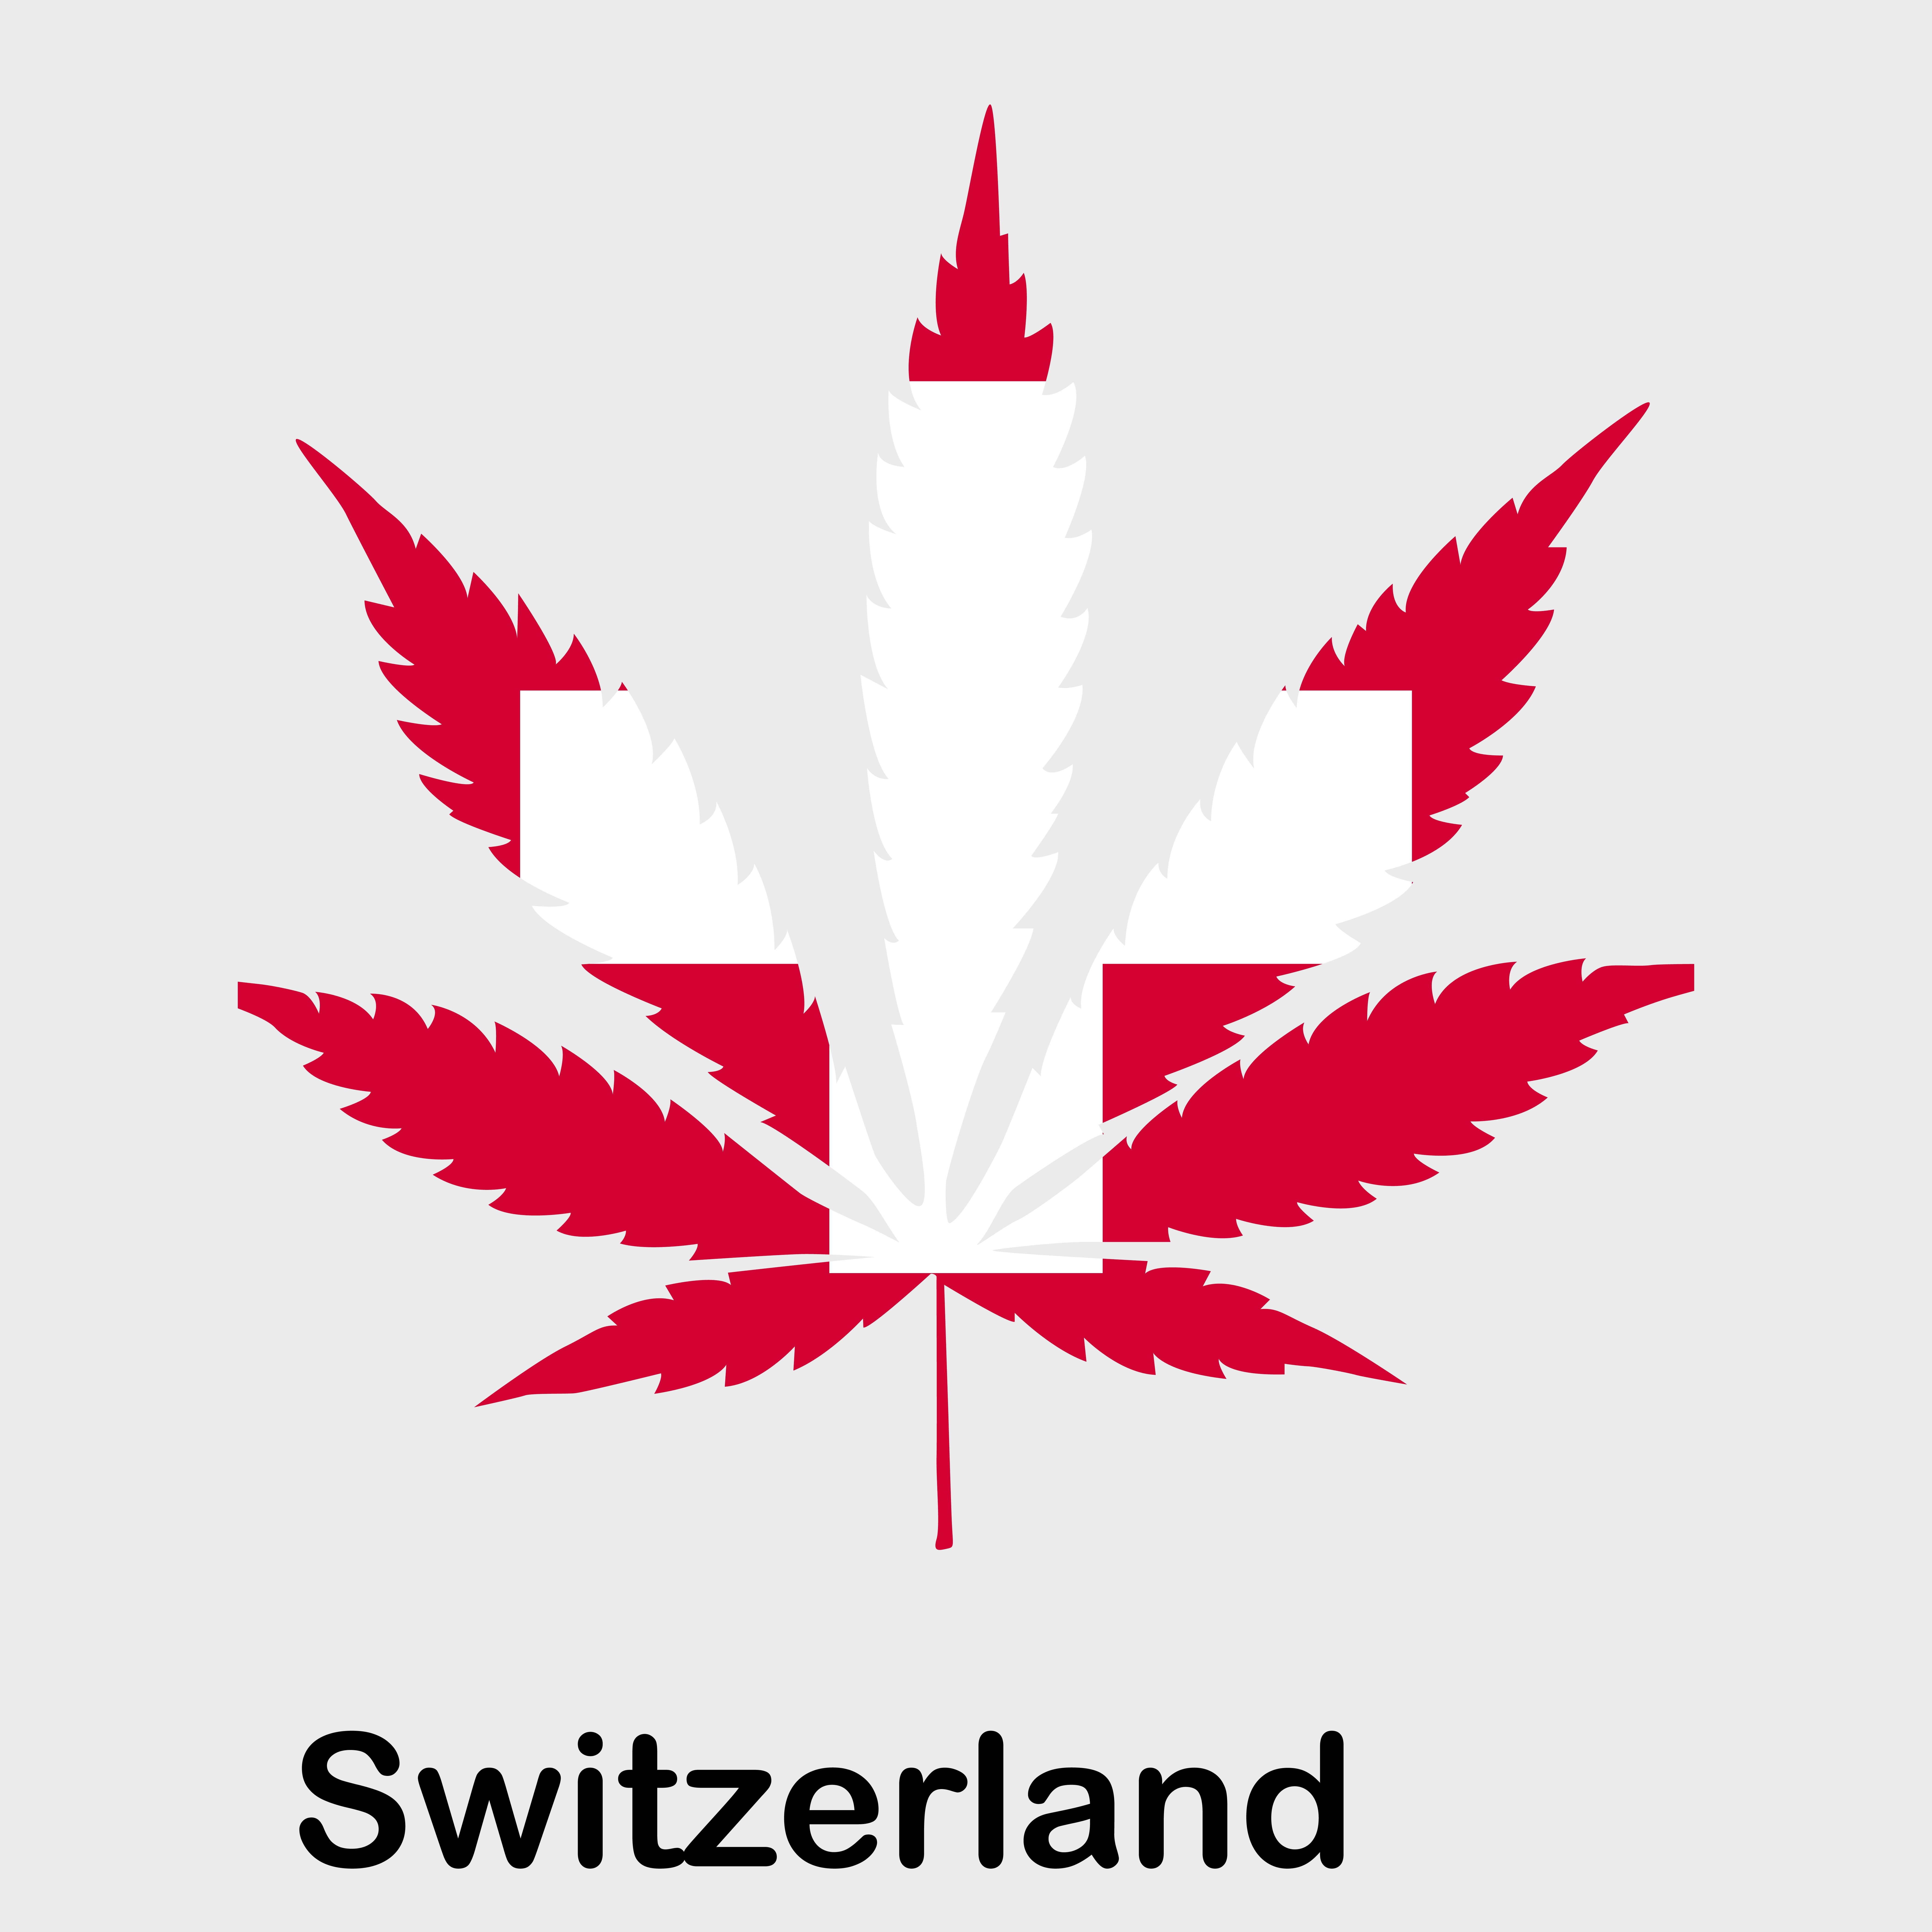 Switzerland is in the process of a cannabis pilot program